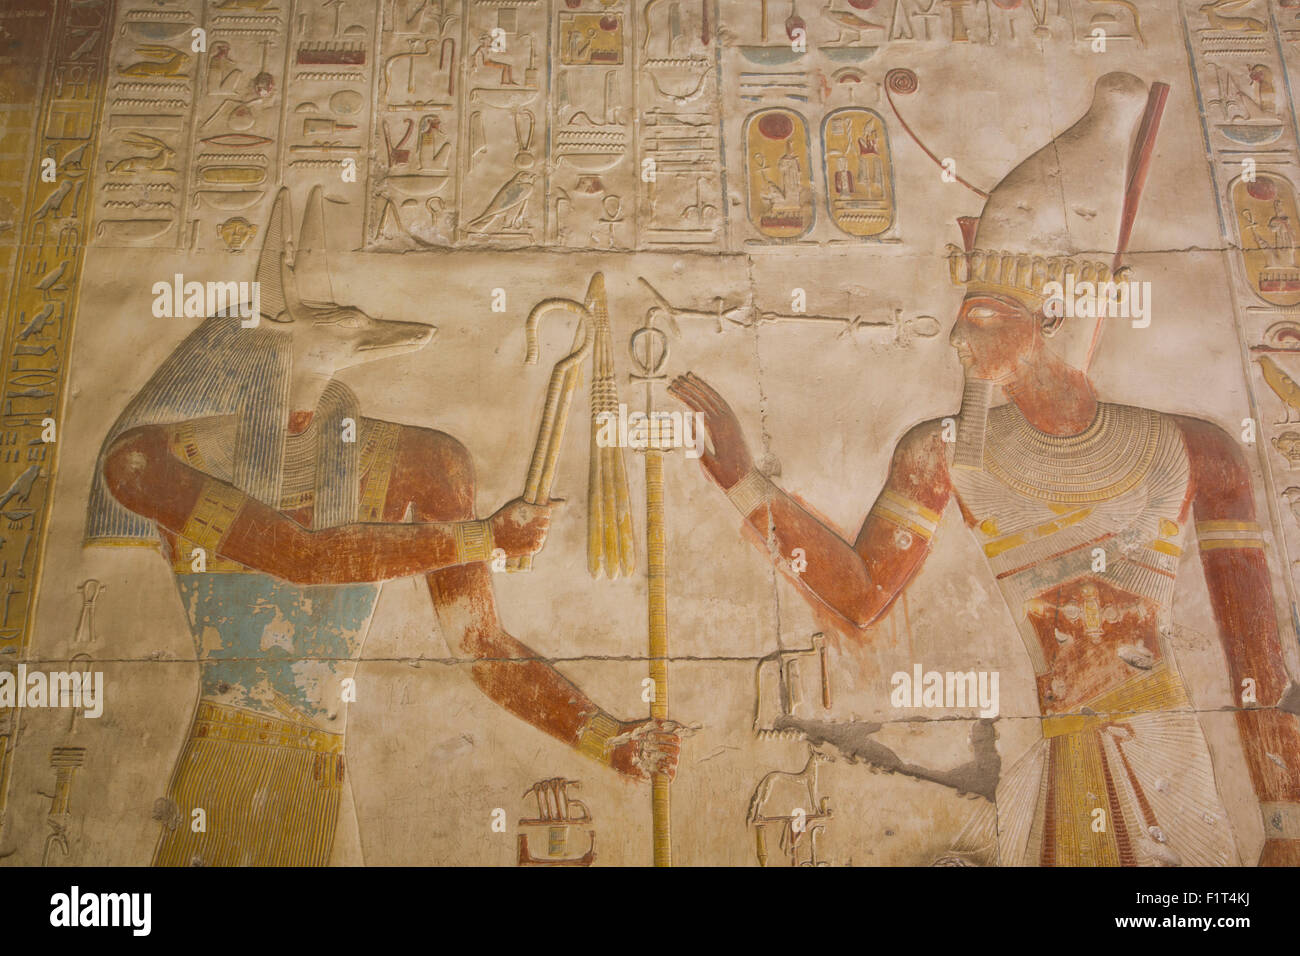 Bas-relief of the God Anubis on left and Ramses II on right, Temple of Seti I, Abydos, Egypt, North Africa, Africa Stock Photo